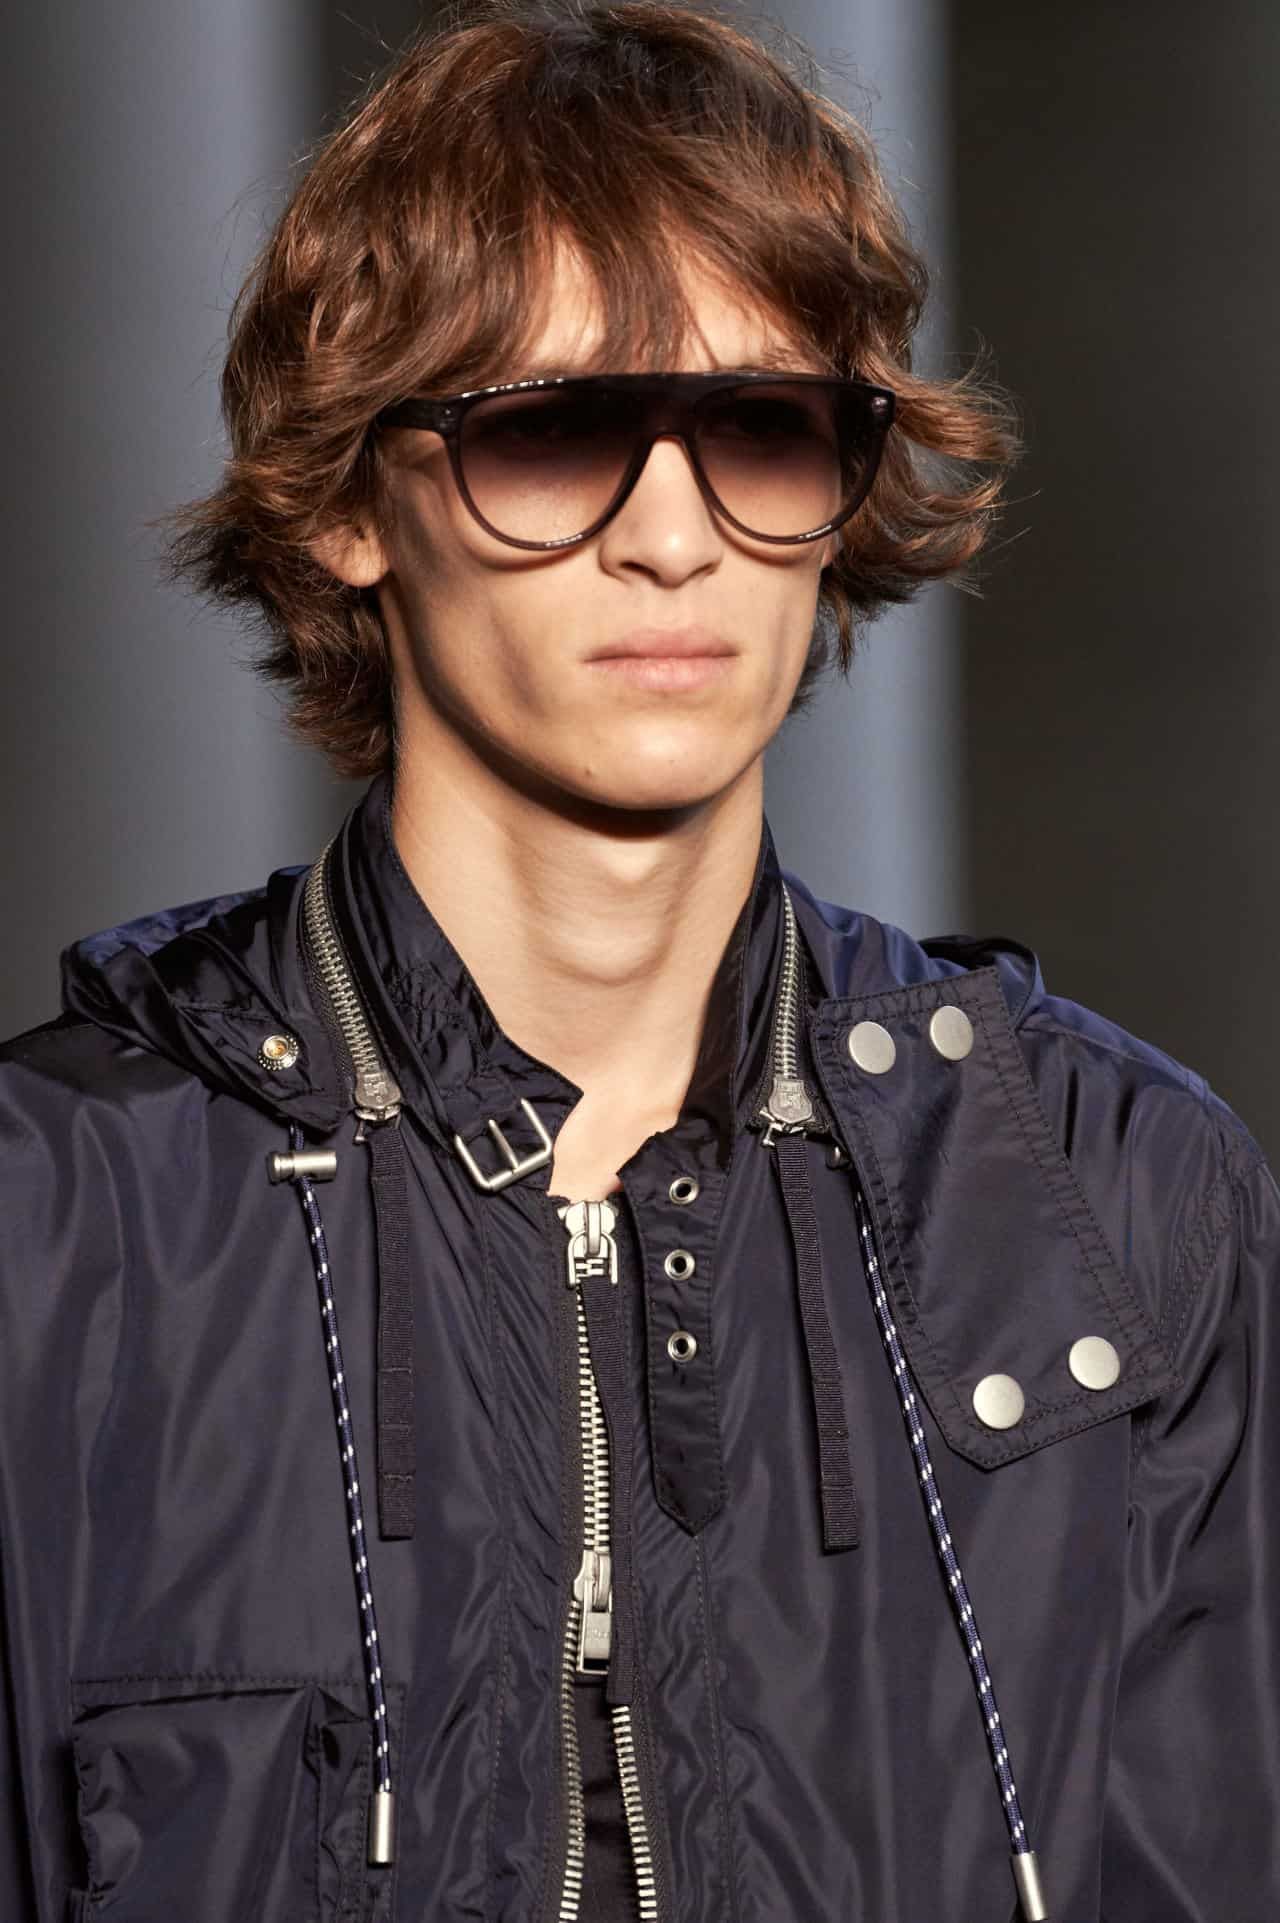 Milan Fashion Week: Hugo Boss looks to conquer the casual look